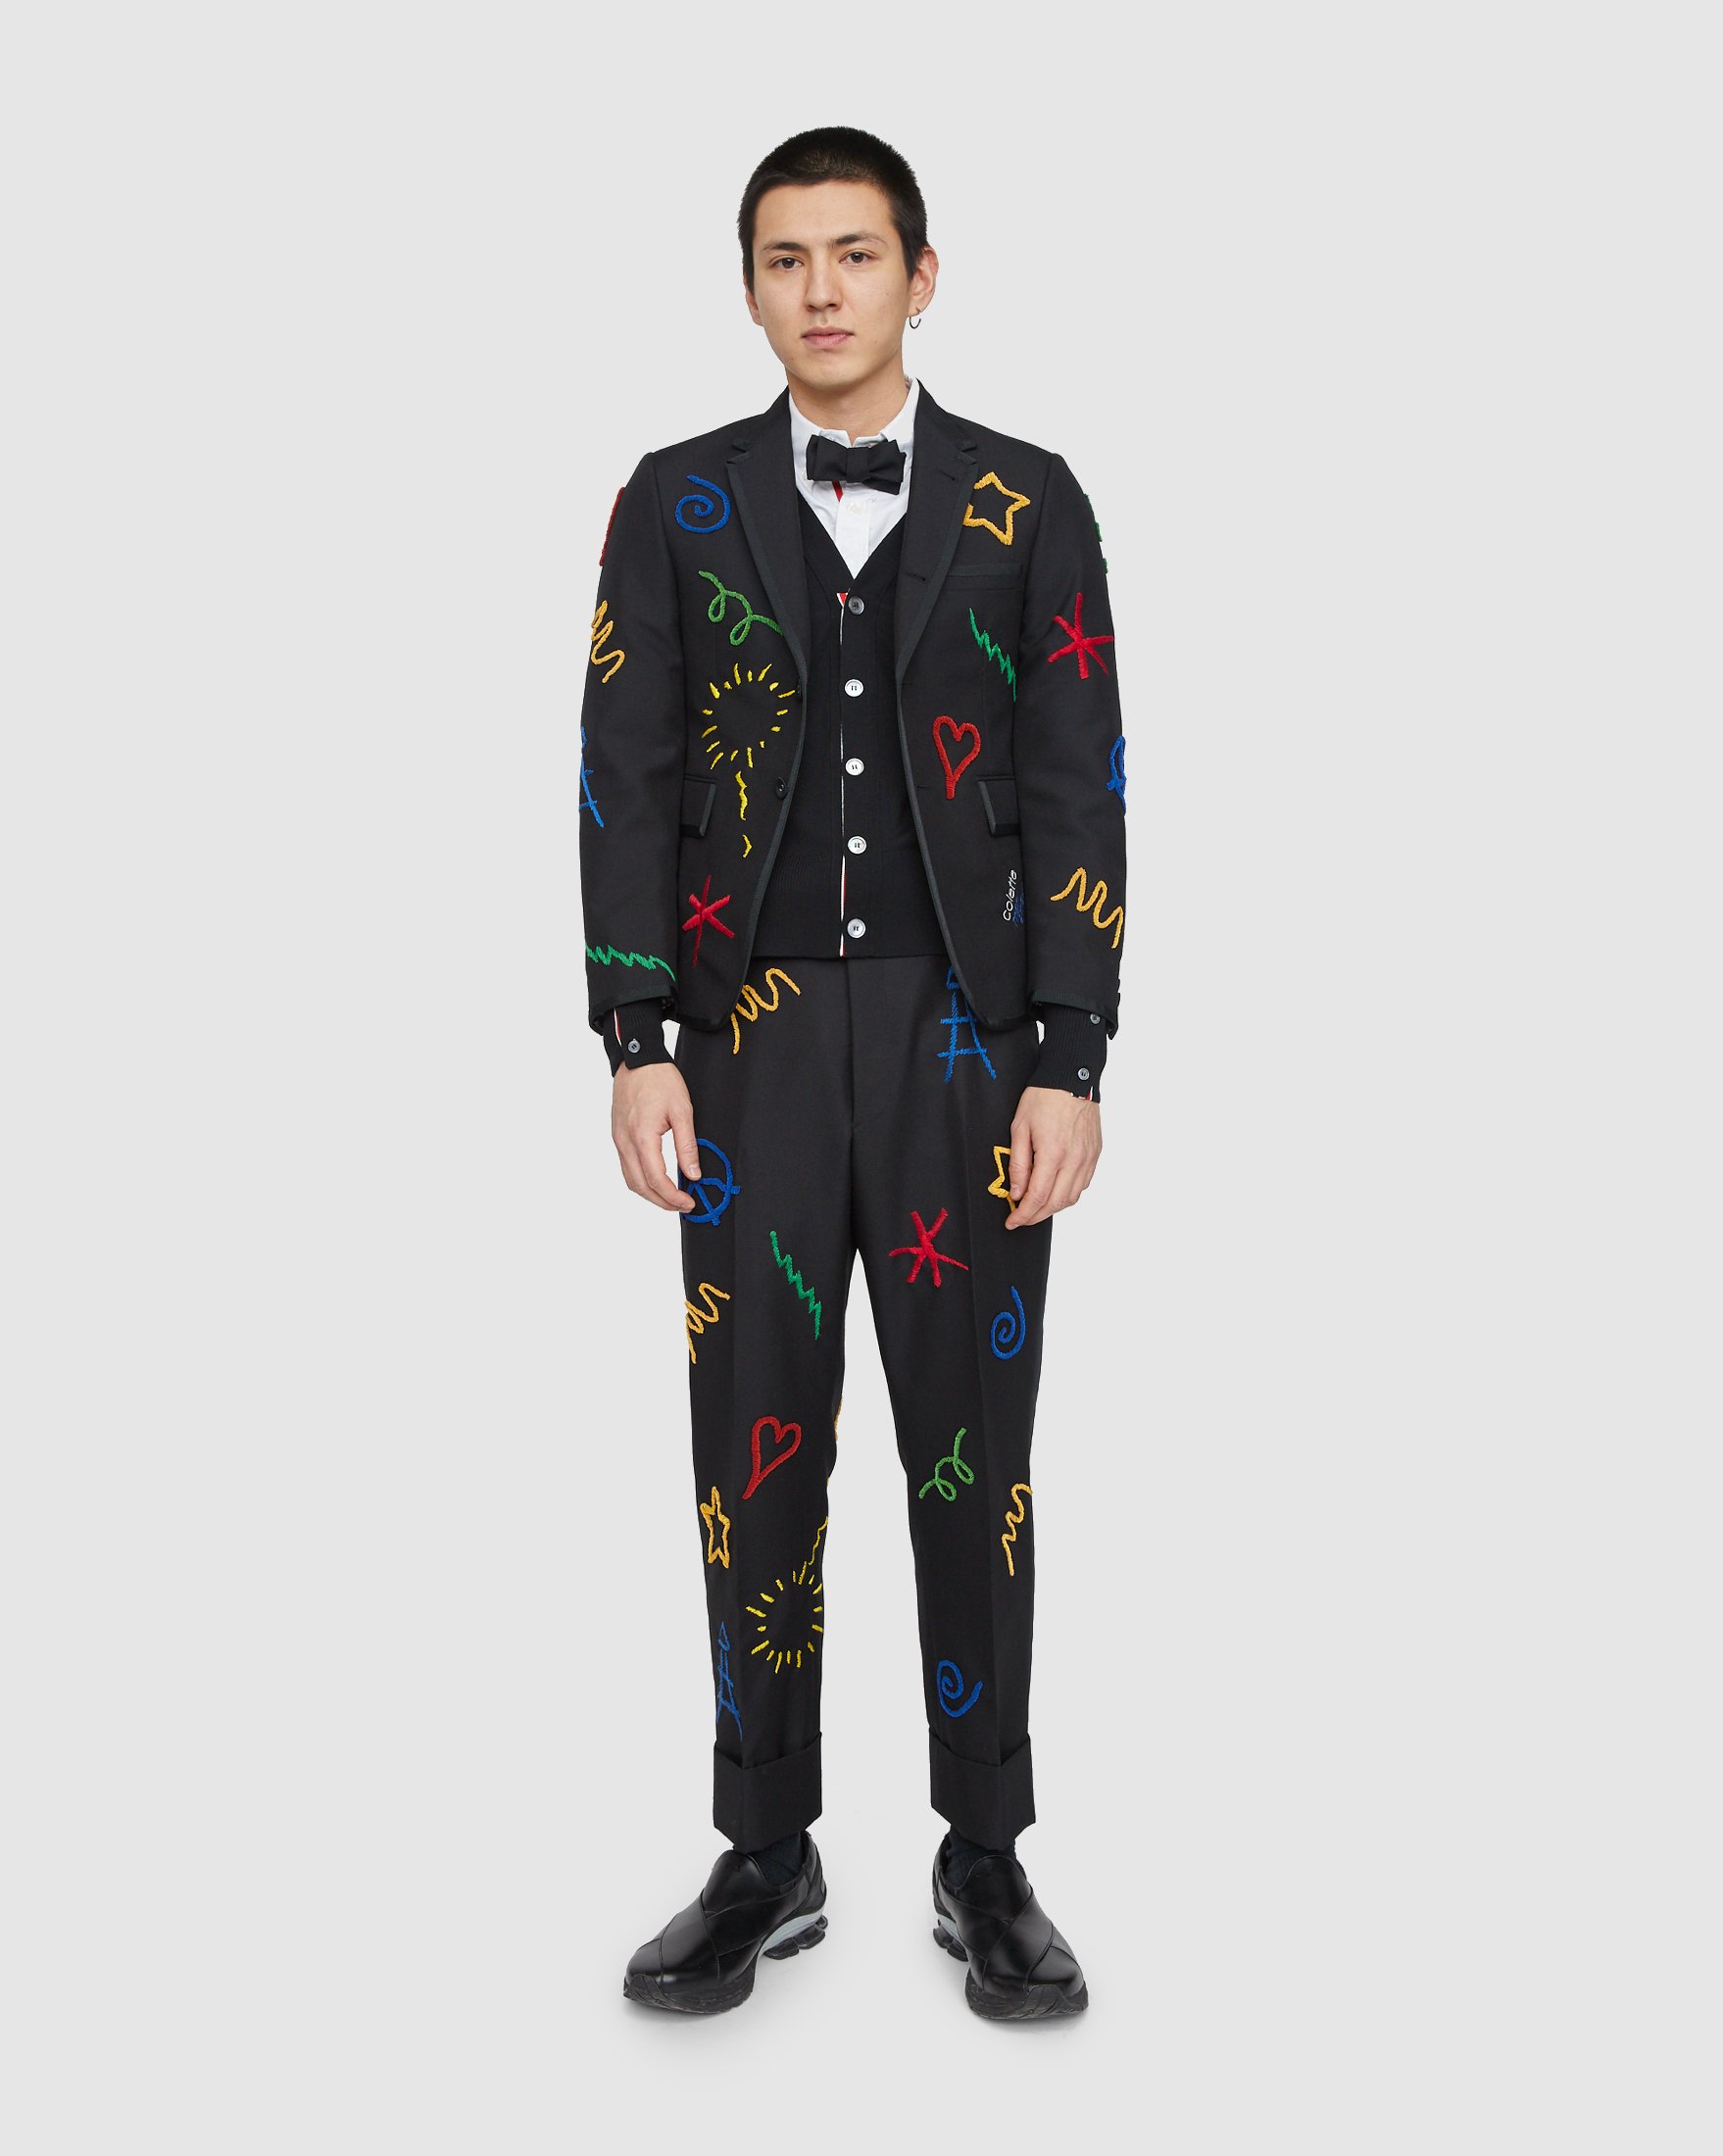 Colette Mon Amour x Thom Browne - Black Embroidered Tux Suit - Clothing - Grey - Image 9